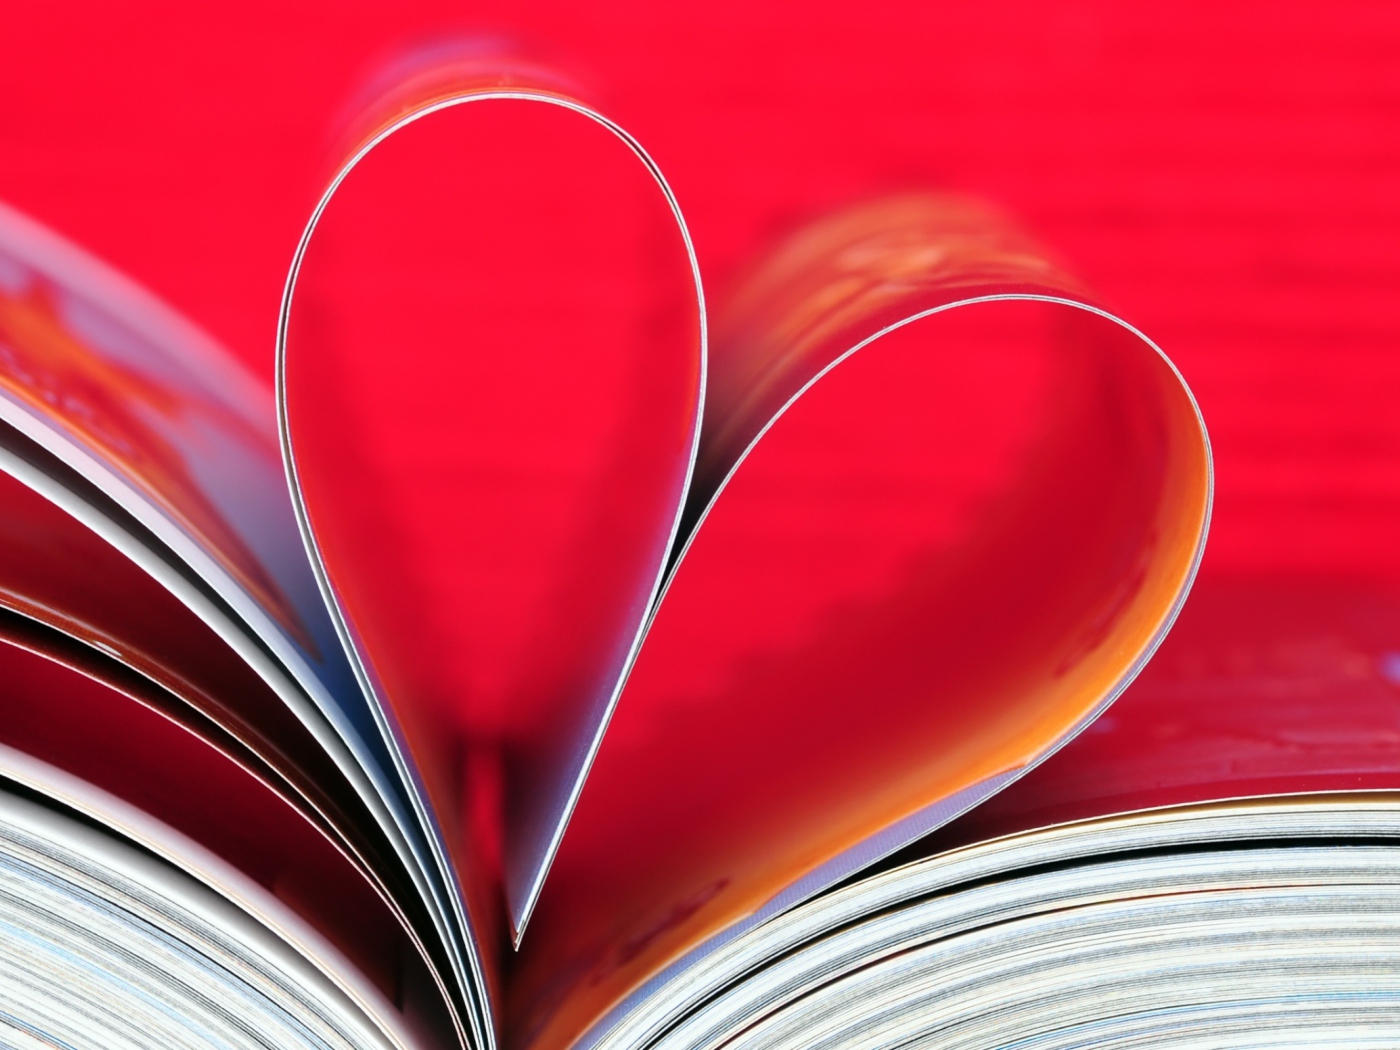 Book Pages Form A Heart wallpaper 1400x1050